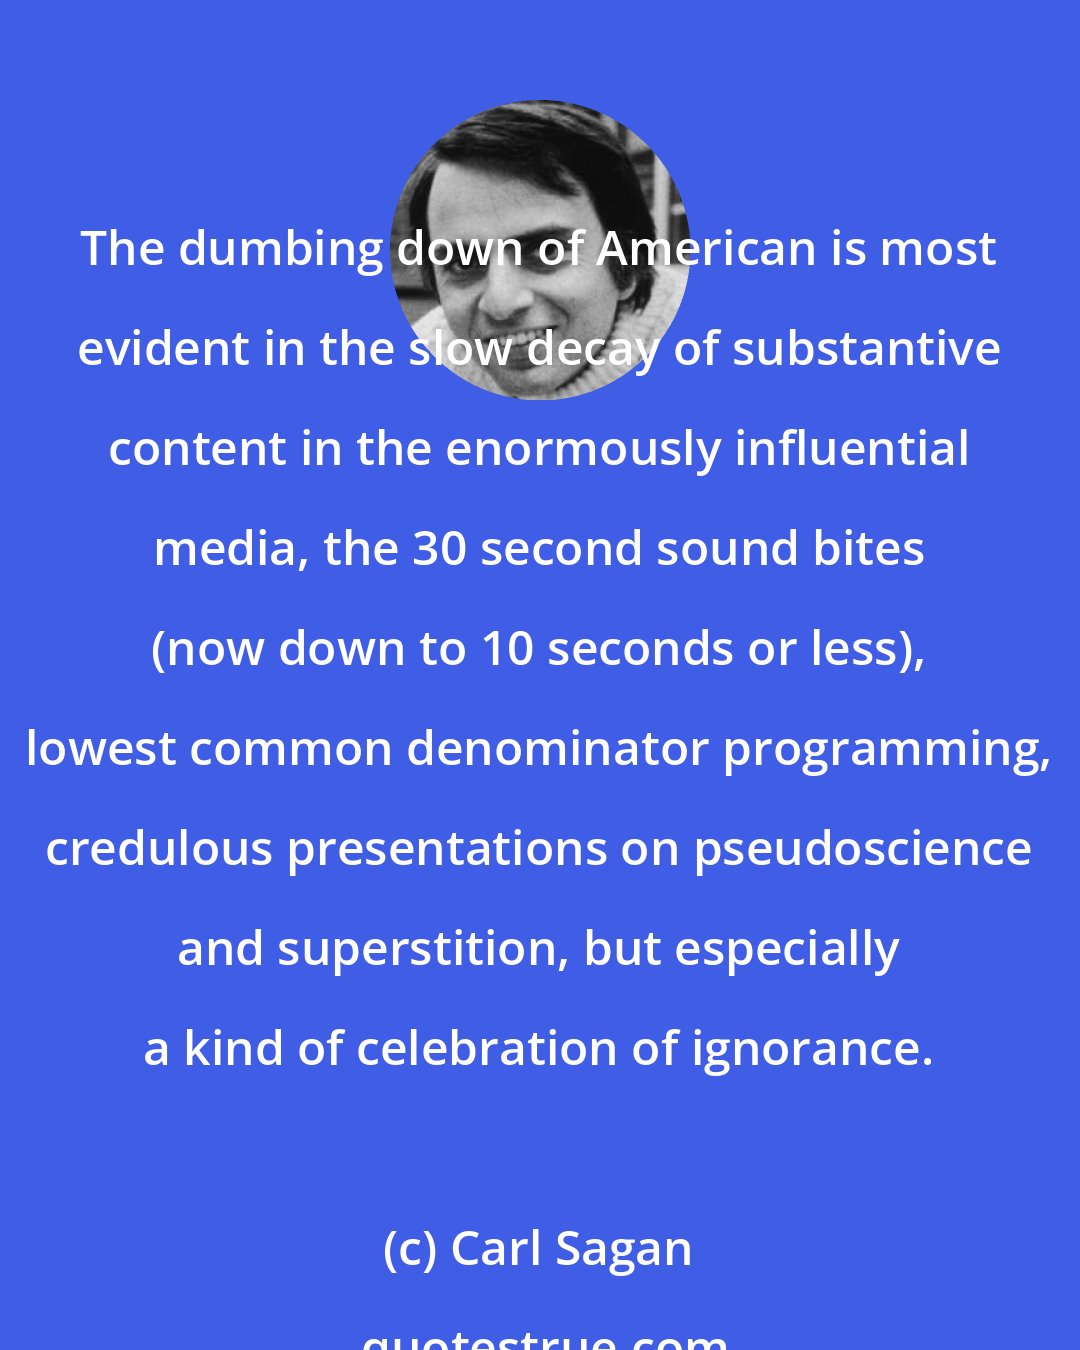 Carl Sagan: The dumbing down of American is most evident in the slow decay of substantive content in the enormously influential media, the 30 second sound bites (now down to 10 seconds or less), lowest common denominator programming, credulous presentations on pseudoscience and superstition, but especially a kind of celebration of ignorance.